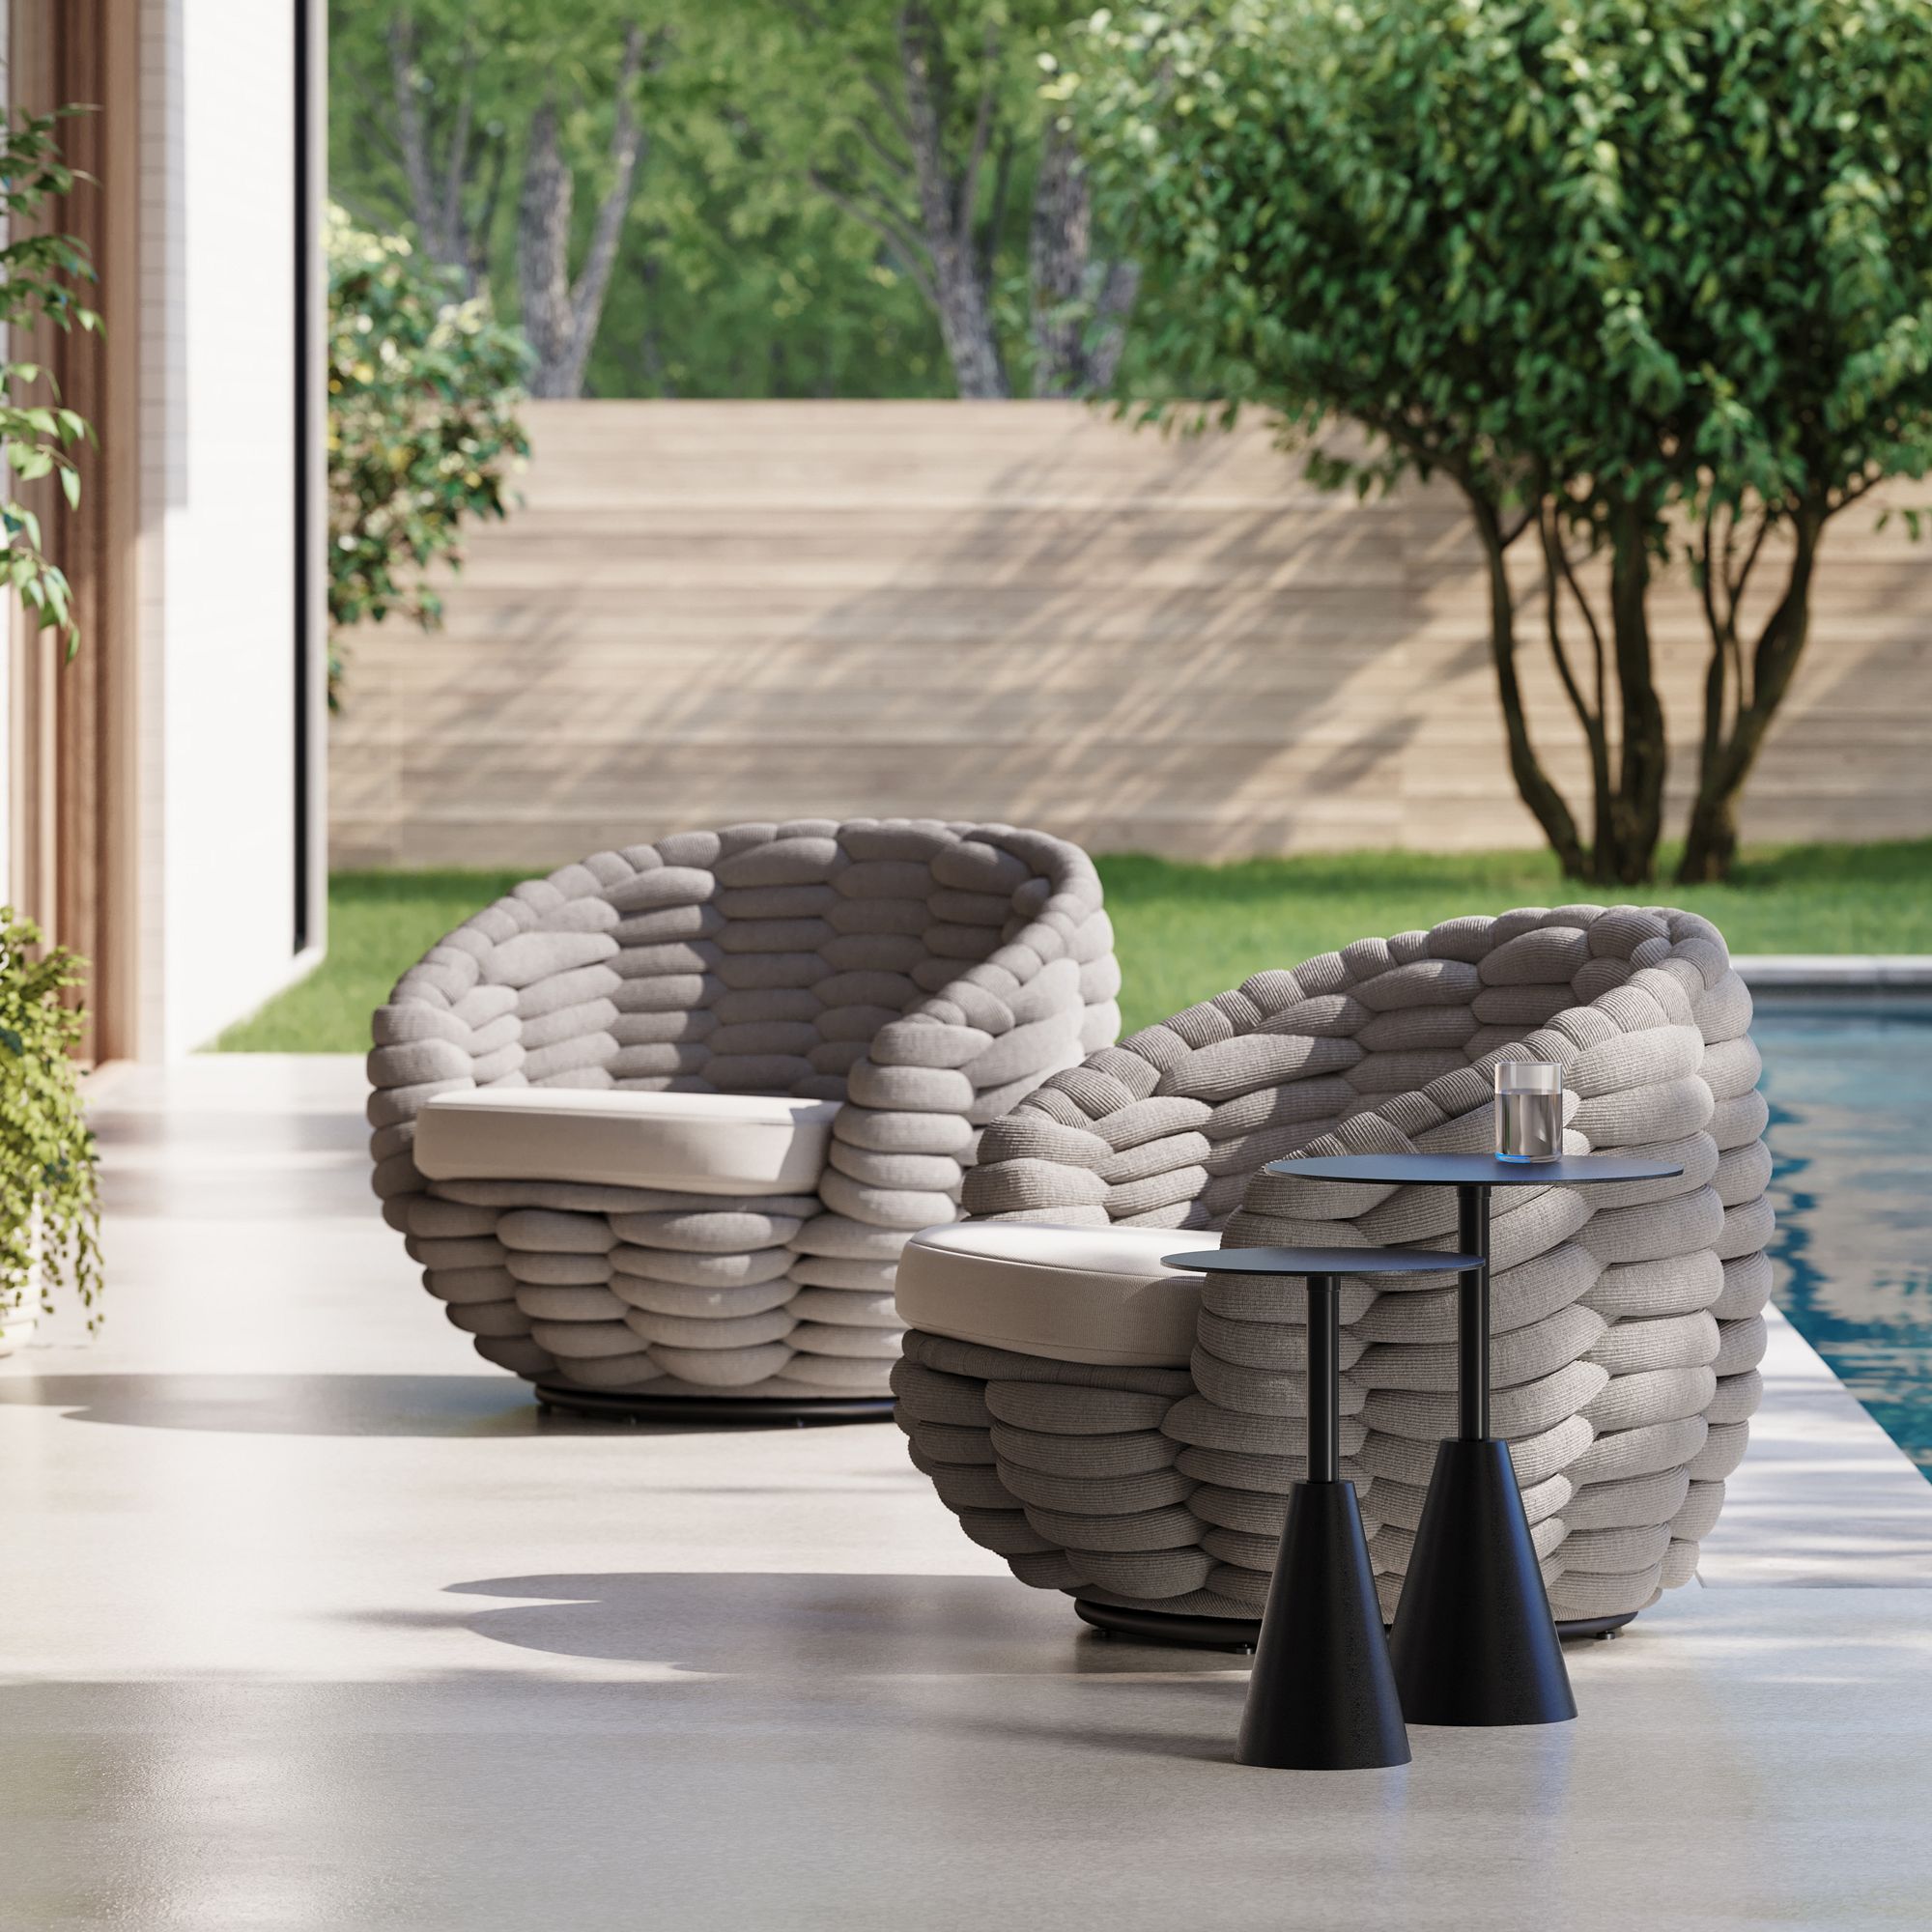 Cozy Outdoor Swivel Chairs & Tyra Nesting Side Tables Set | West Elm